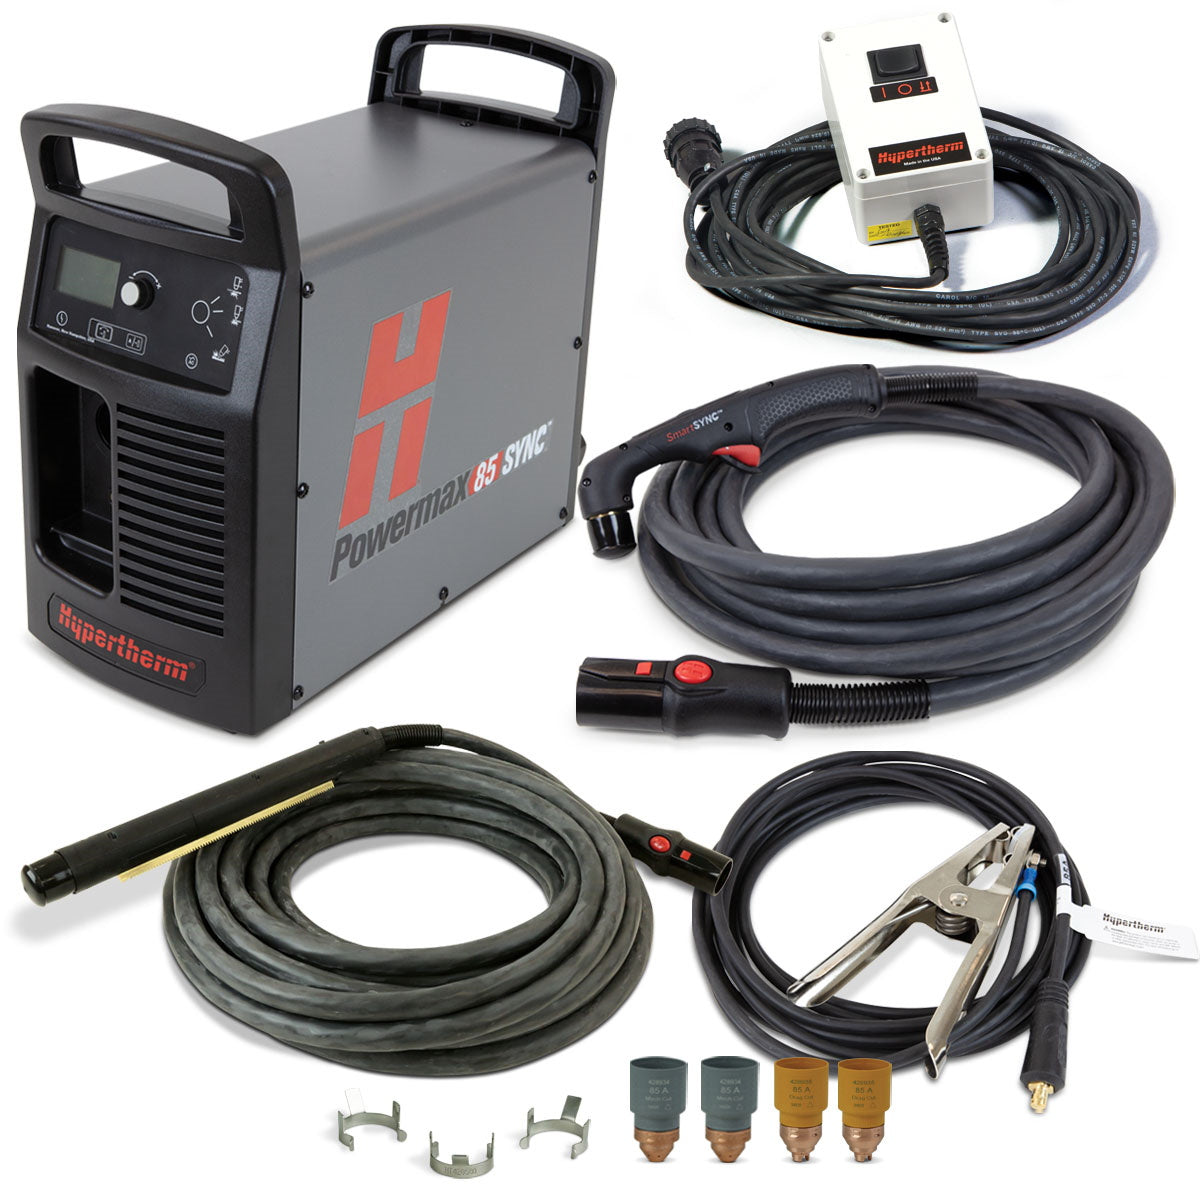 Hypertherm Powermax 85 Sync Plasma w/CPC 25ft 75° Hand and 35ft 180° Mech Torch (087191)